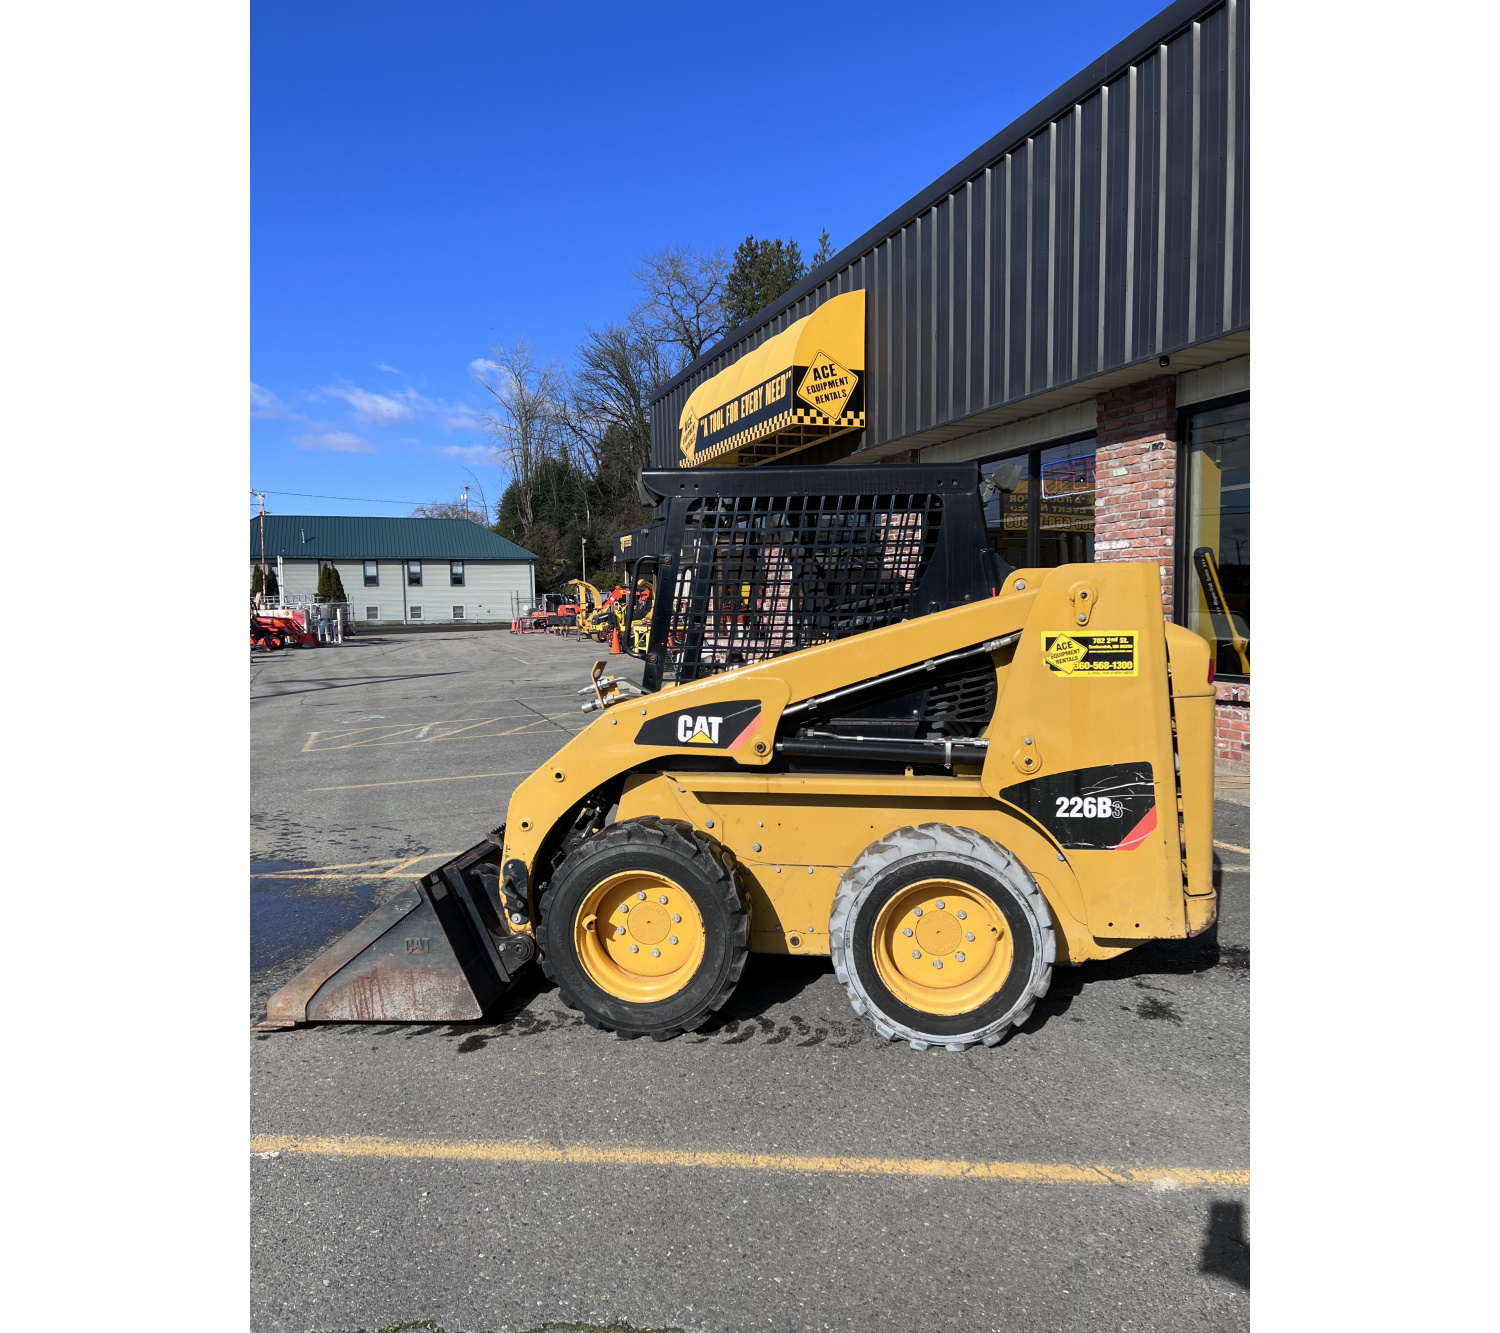 wheel loader rental from ace equipment rentals in snohomish, wa